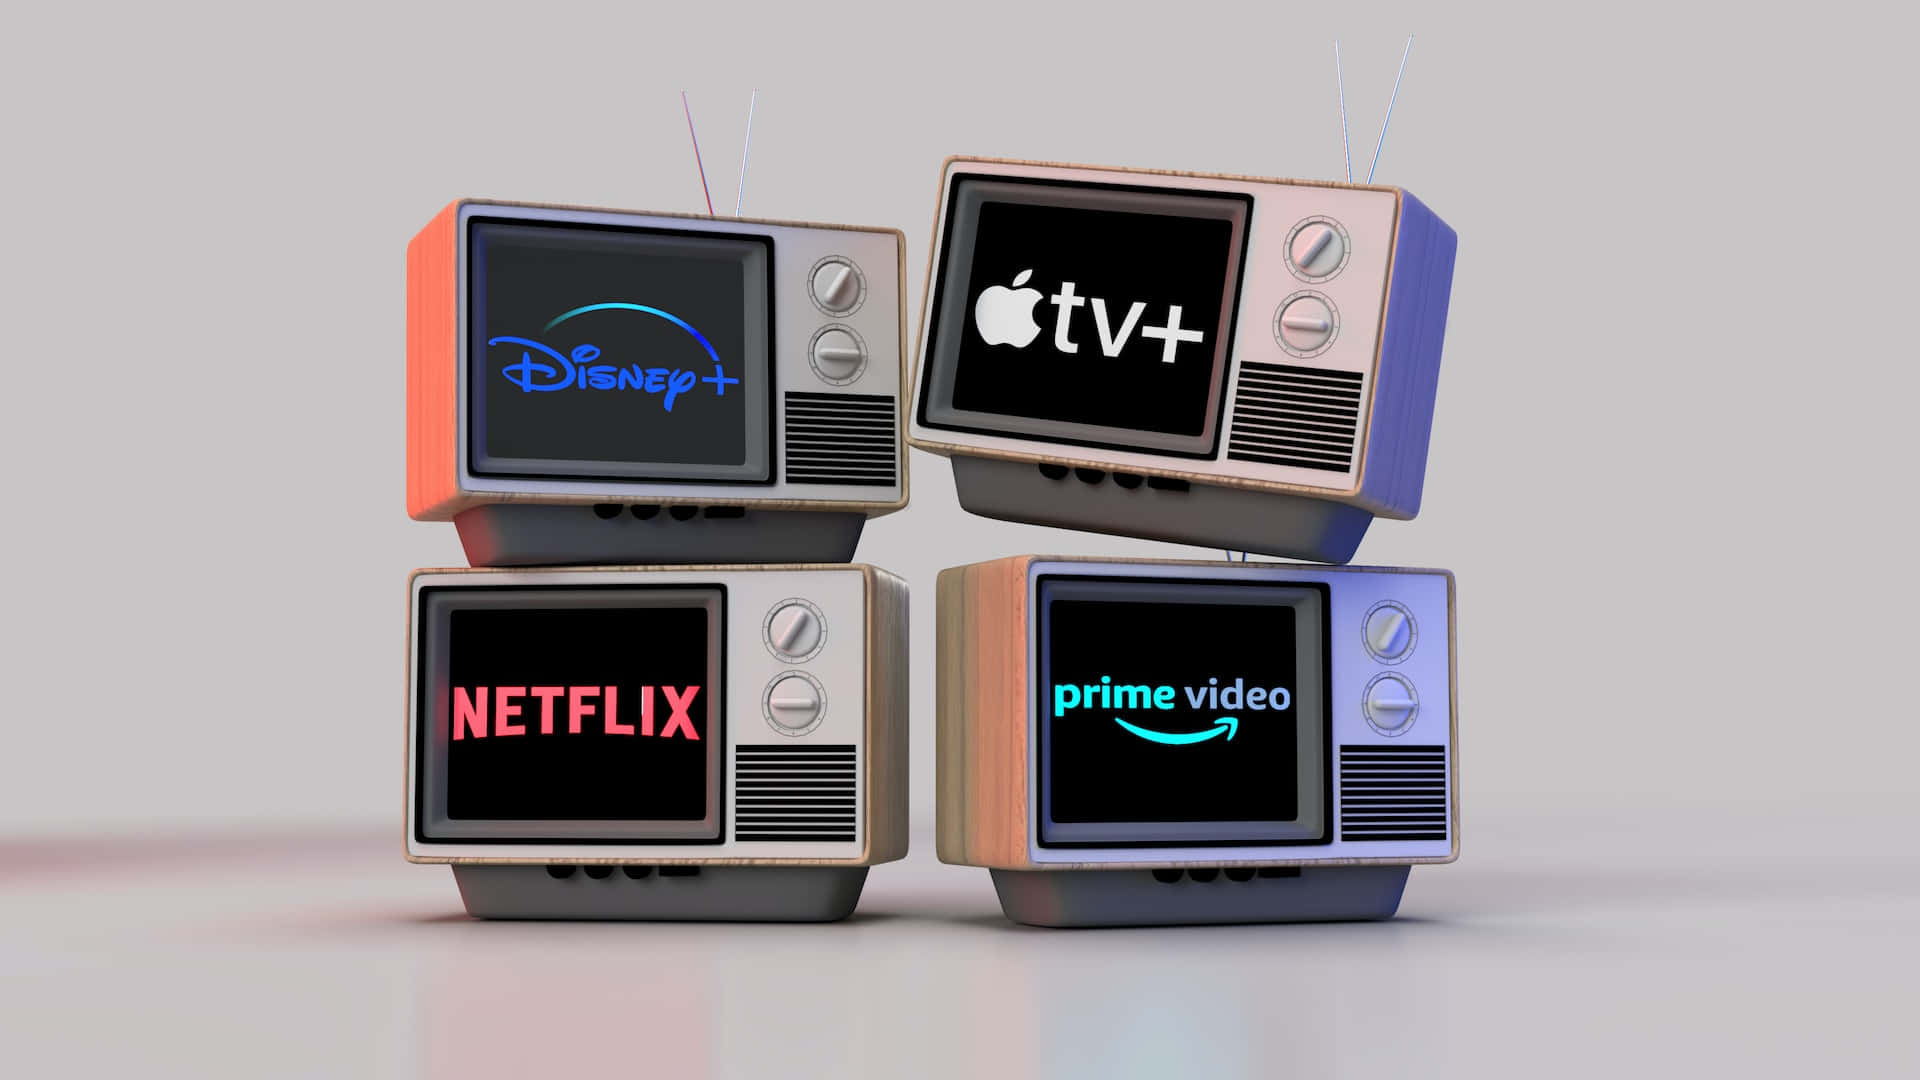 Enjoy streaming your favorite shows with ease. Wallpaper